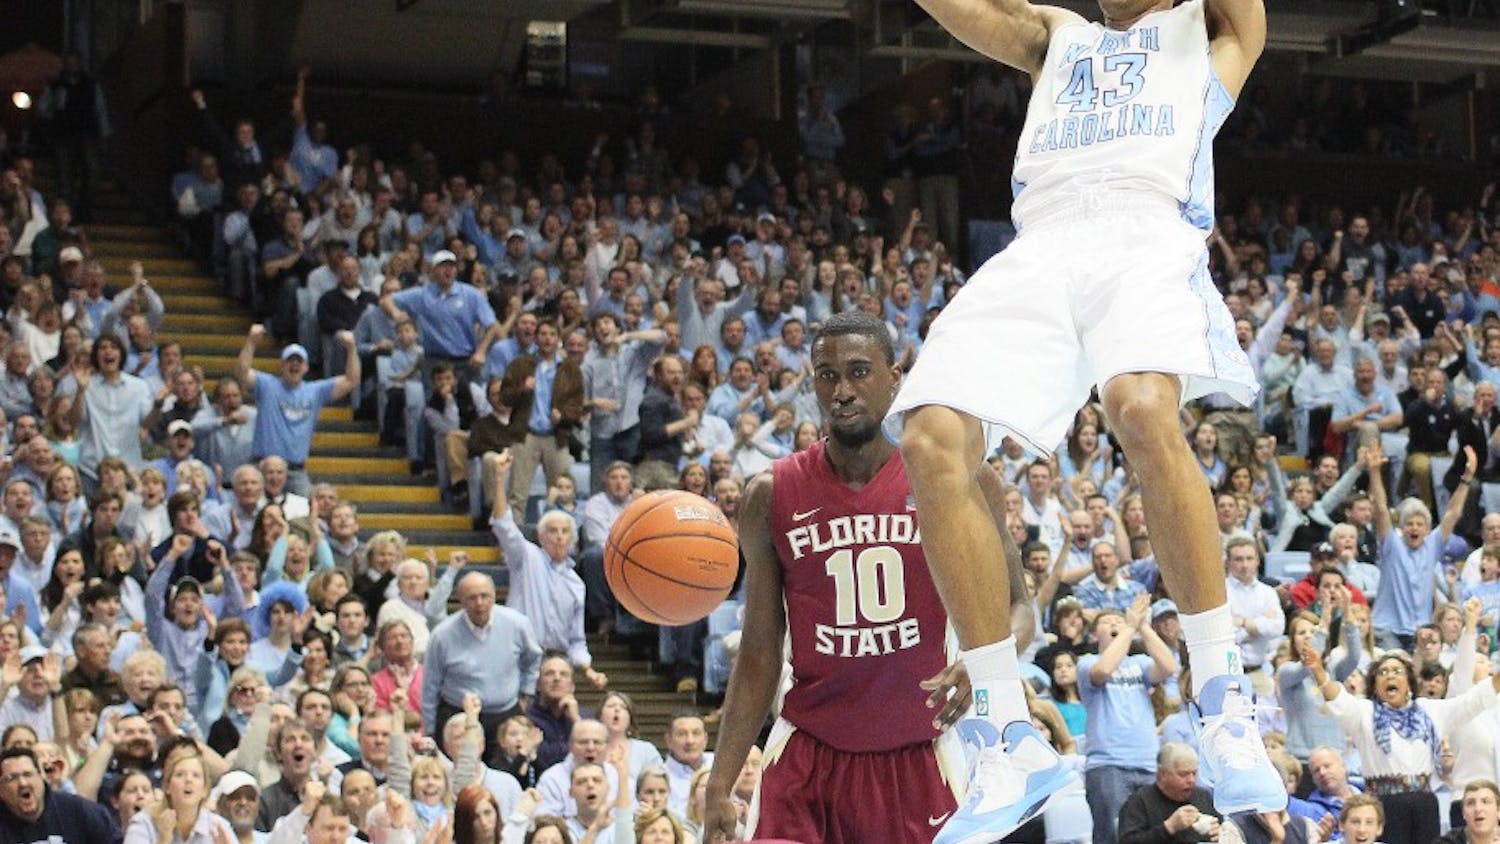 	James Michael McAdoo hangs on the rim after a put-back dunk. McAdoo scored a game high 21 points on 10-15 shooting.